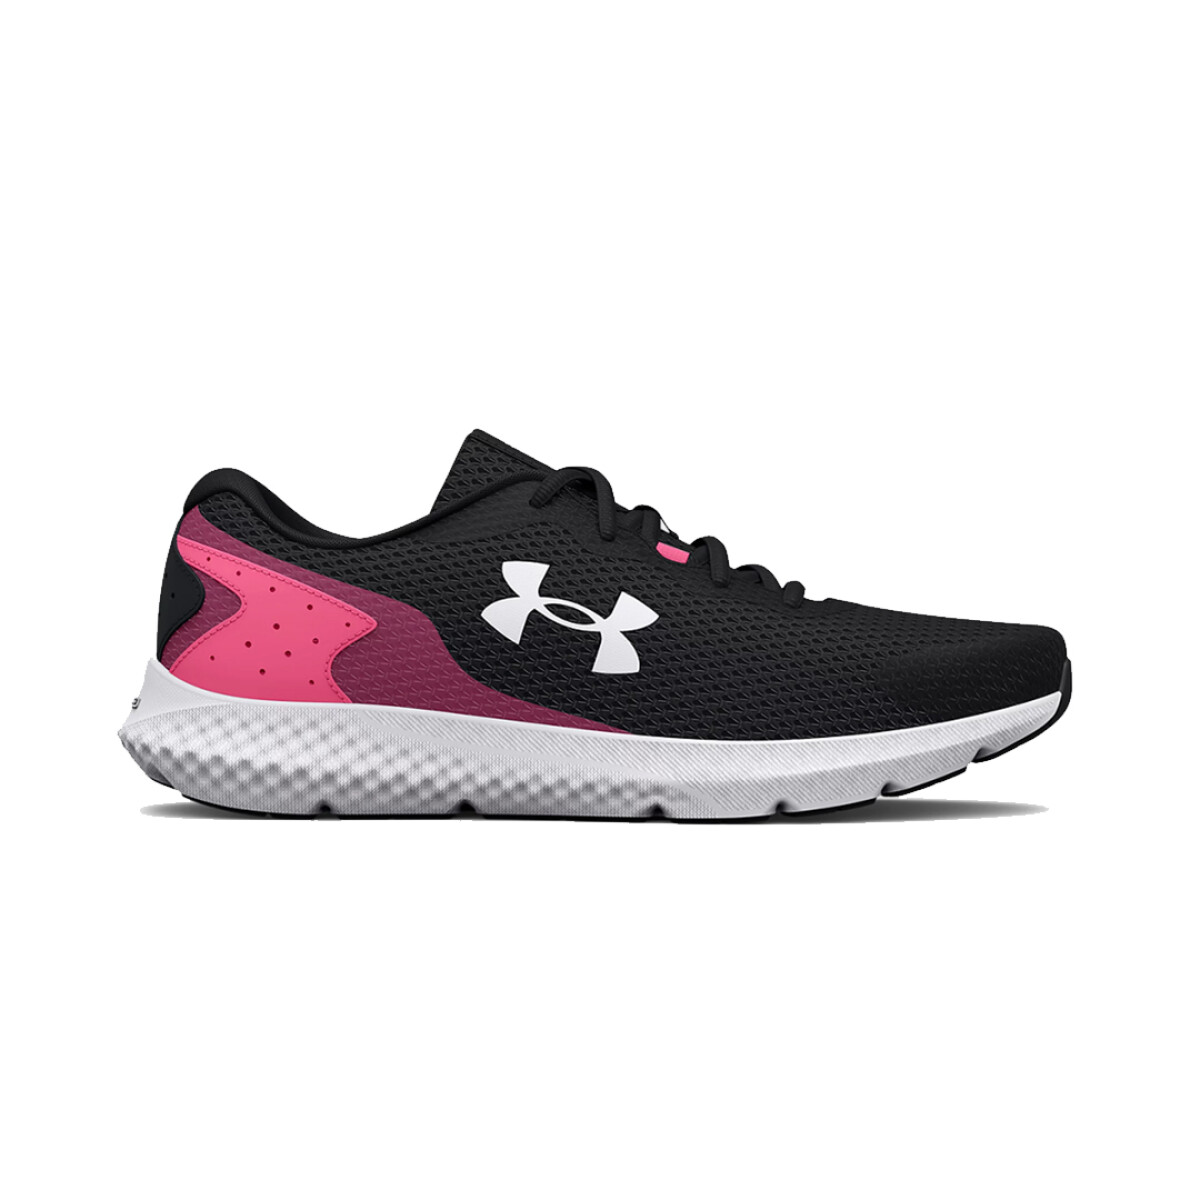 CHARGED ROGUE 3 - UNDER ARMOUR 